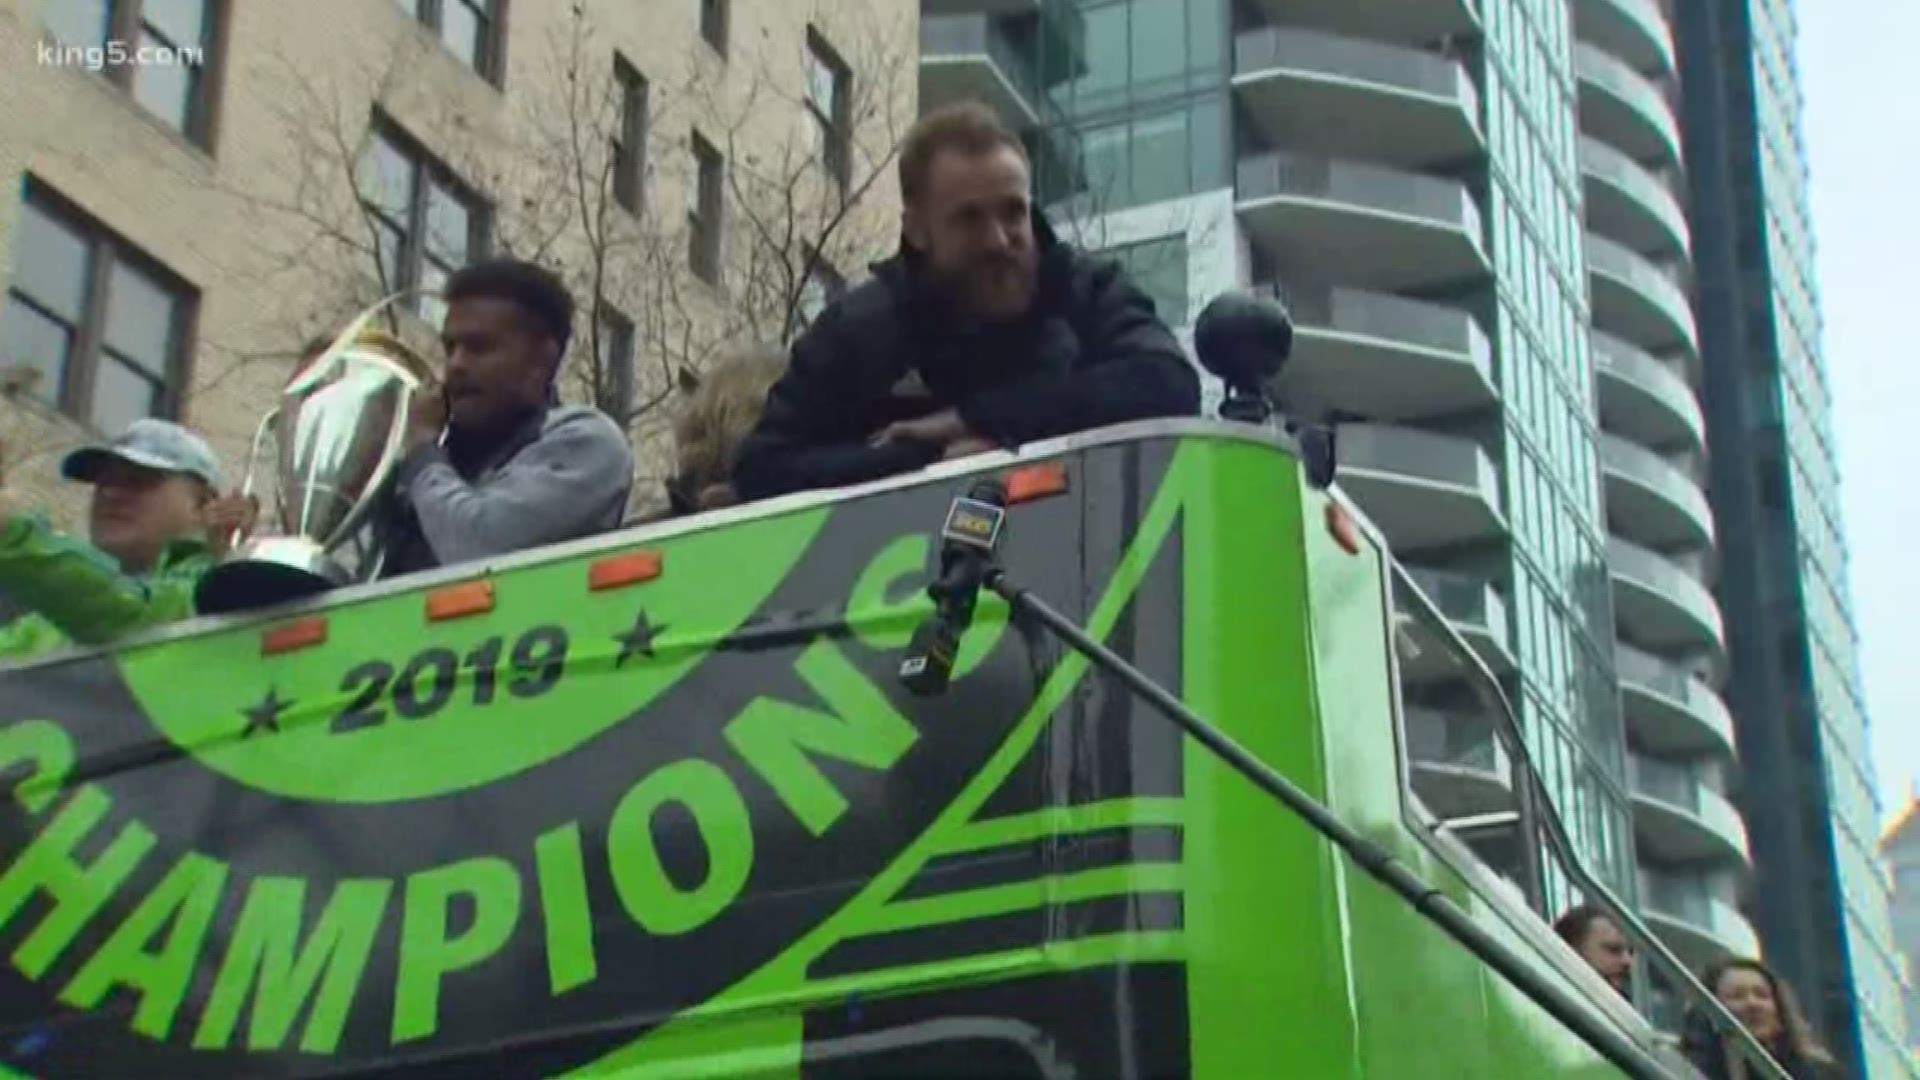 Interviews along the Sounders parade including Stefan Frei.